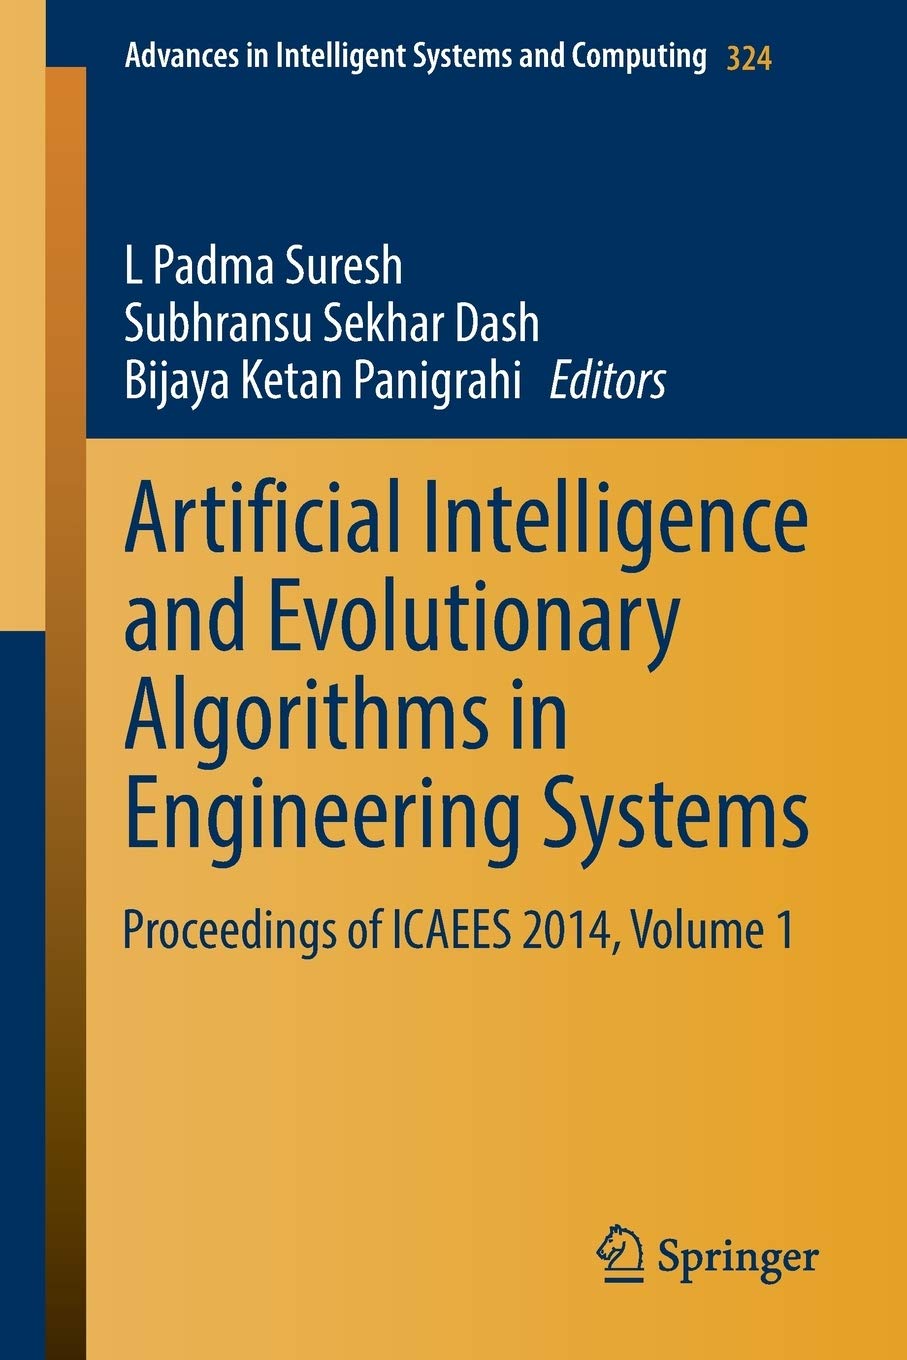 Artificial Intelligence and Evolutionary Algorithms in Engineering Systems: Proceedings of ICAEES 2014, Volume 1 (Advances in Intelligent Systems a...